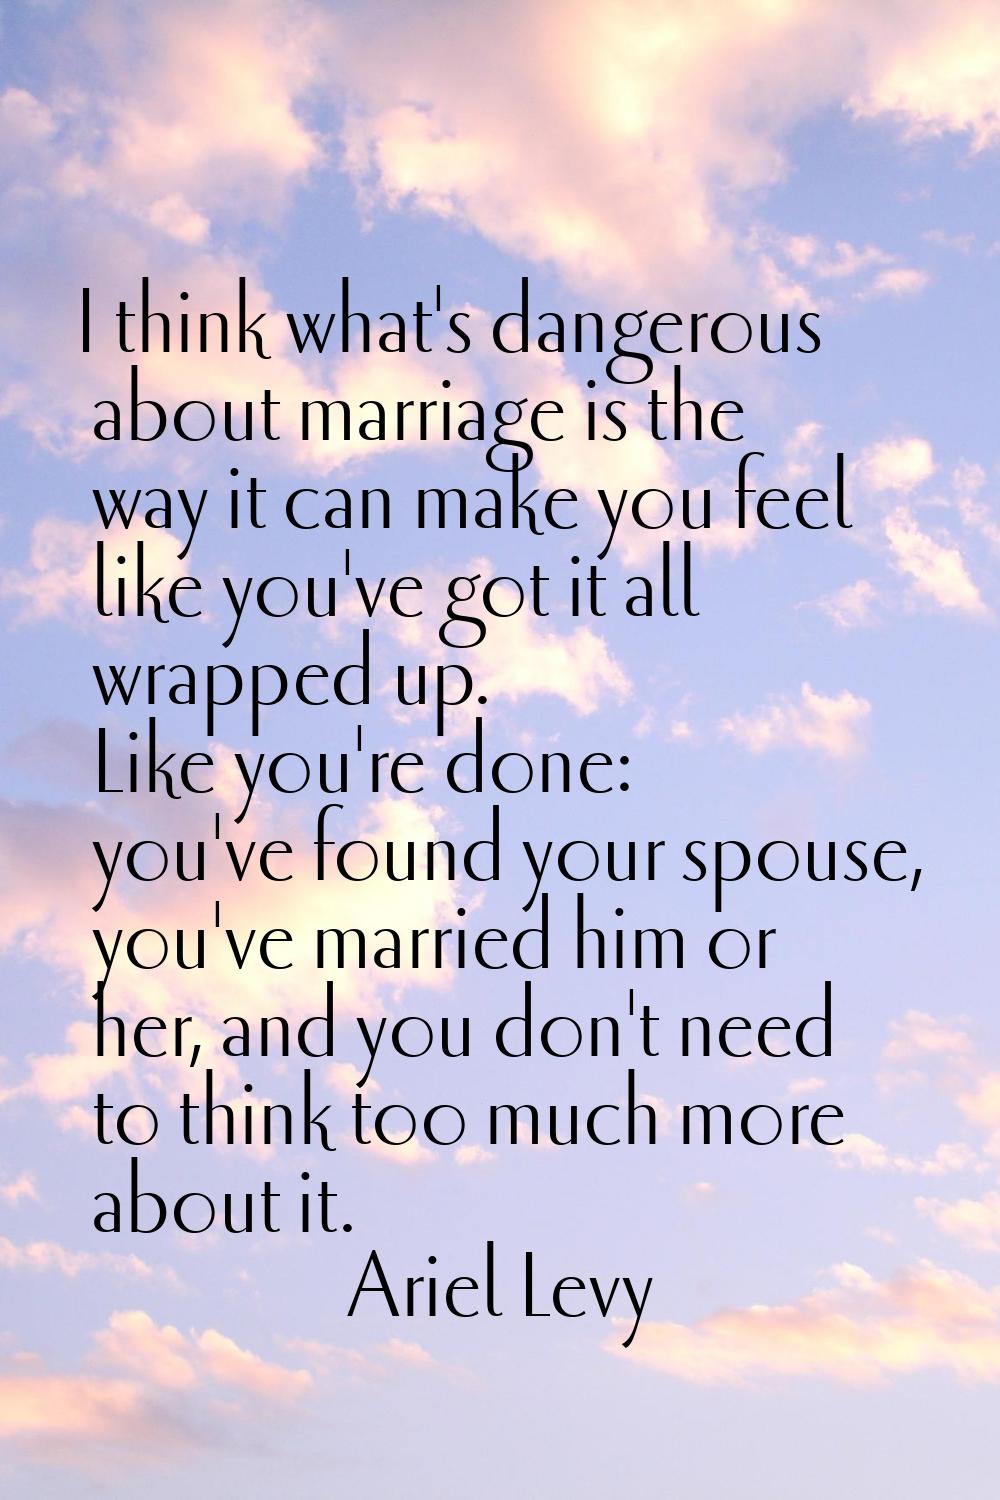 I think what's dangerous about marriage is the way it can make you feel like you've got it all wrap